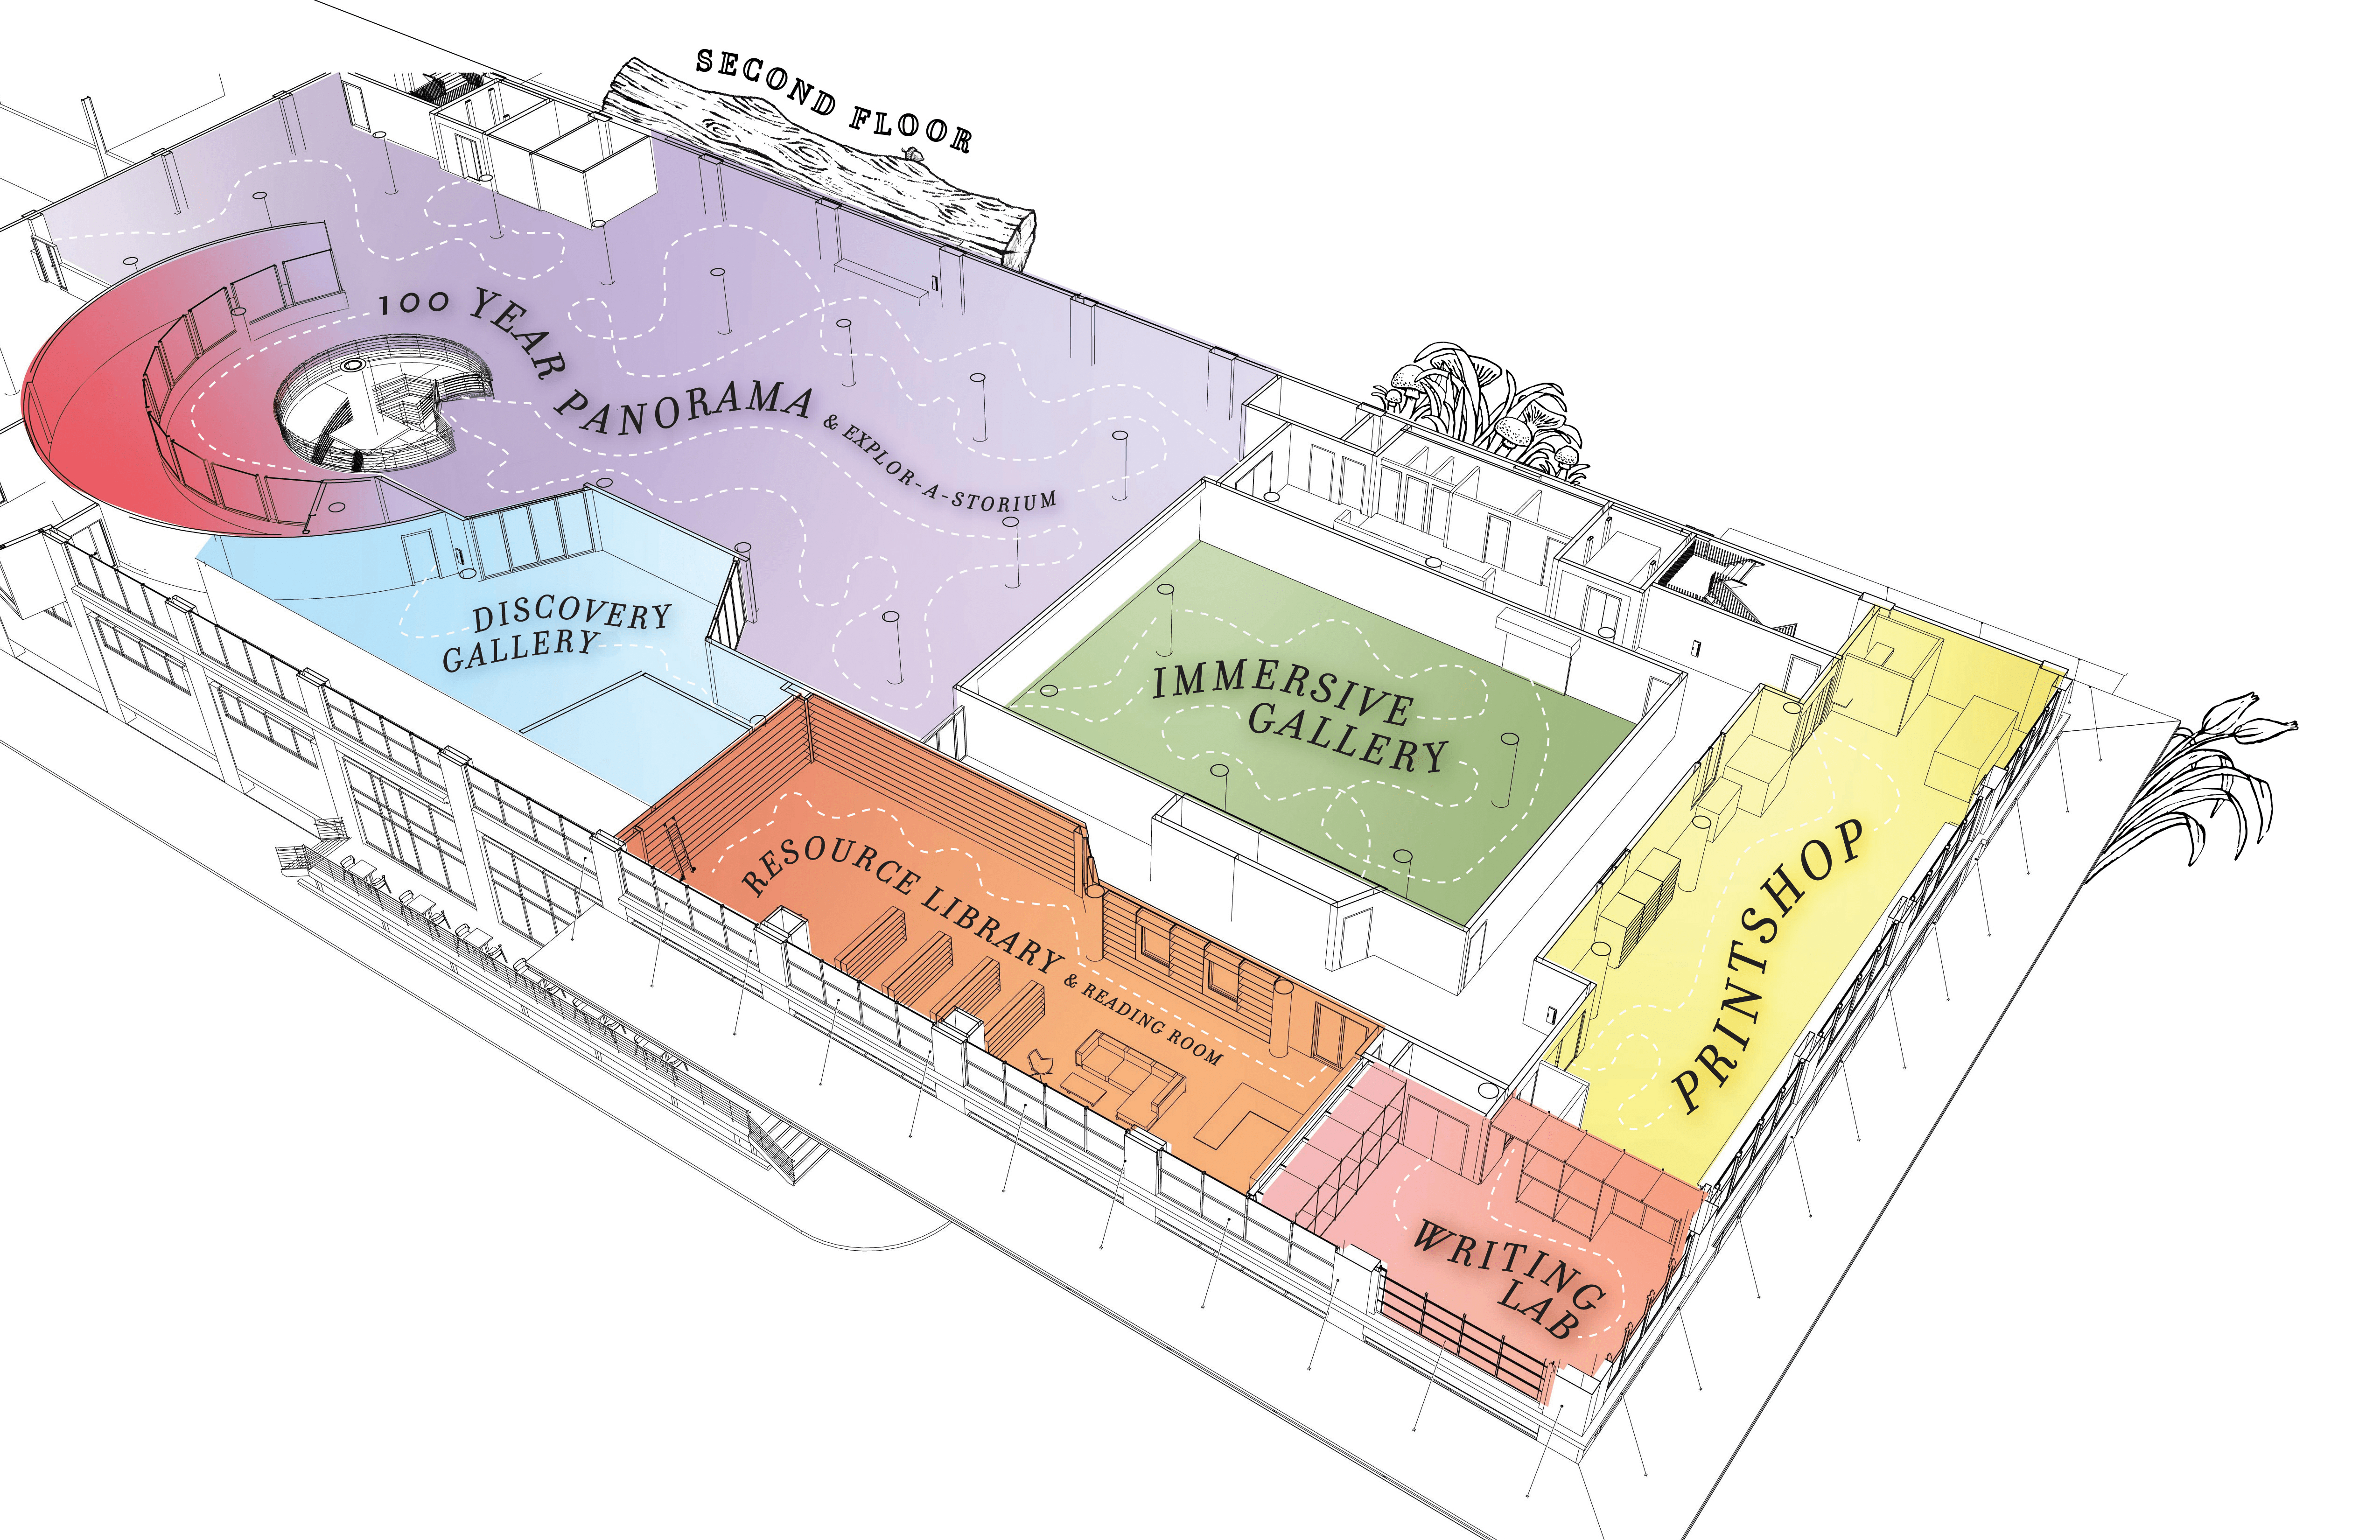 Second Floor layout of the Rabbit hOle.